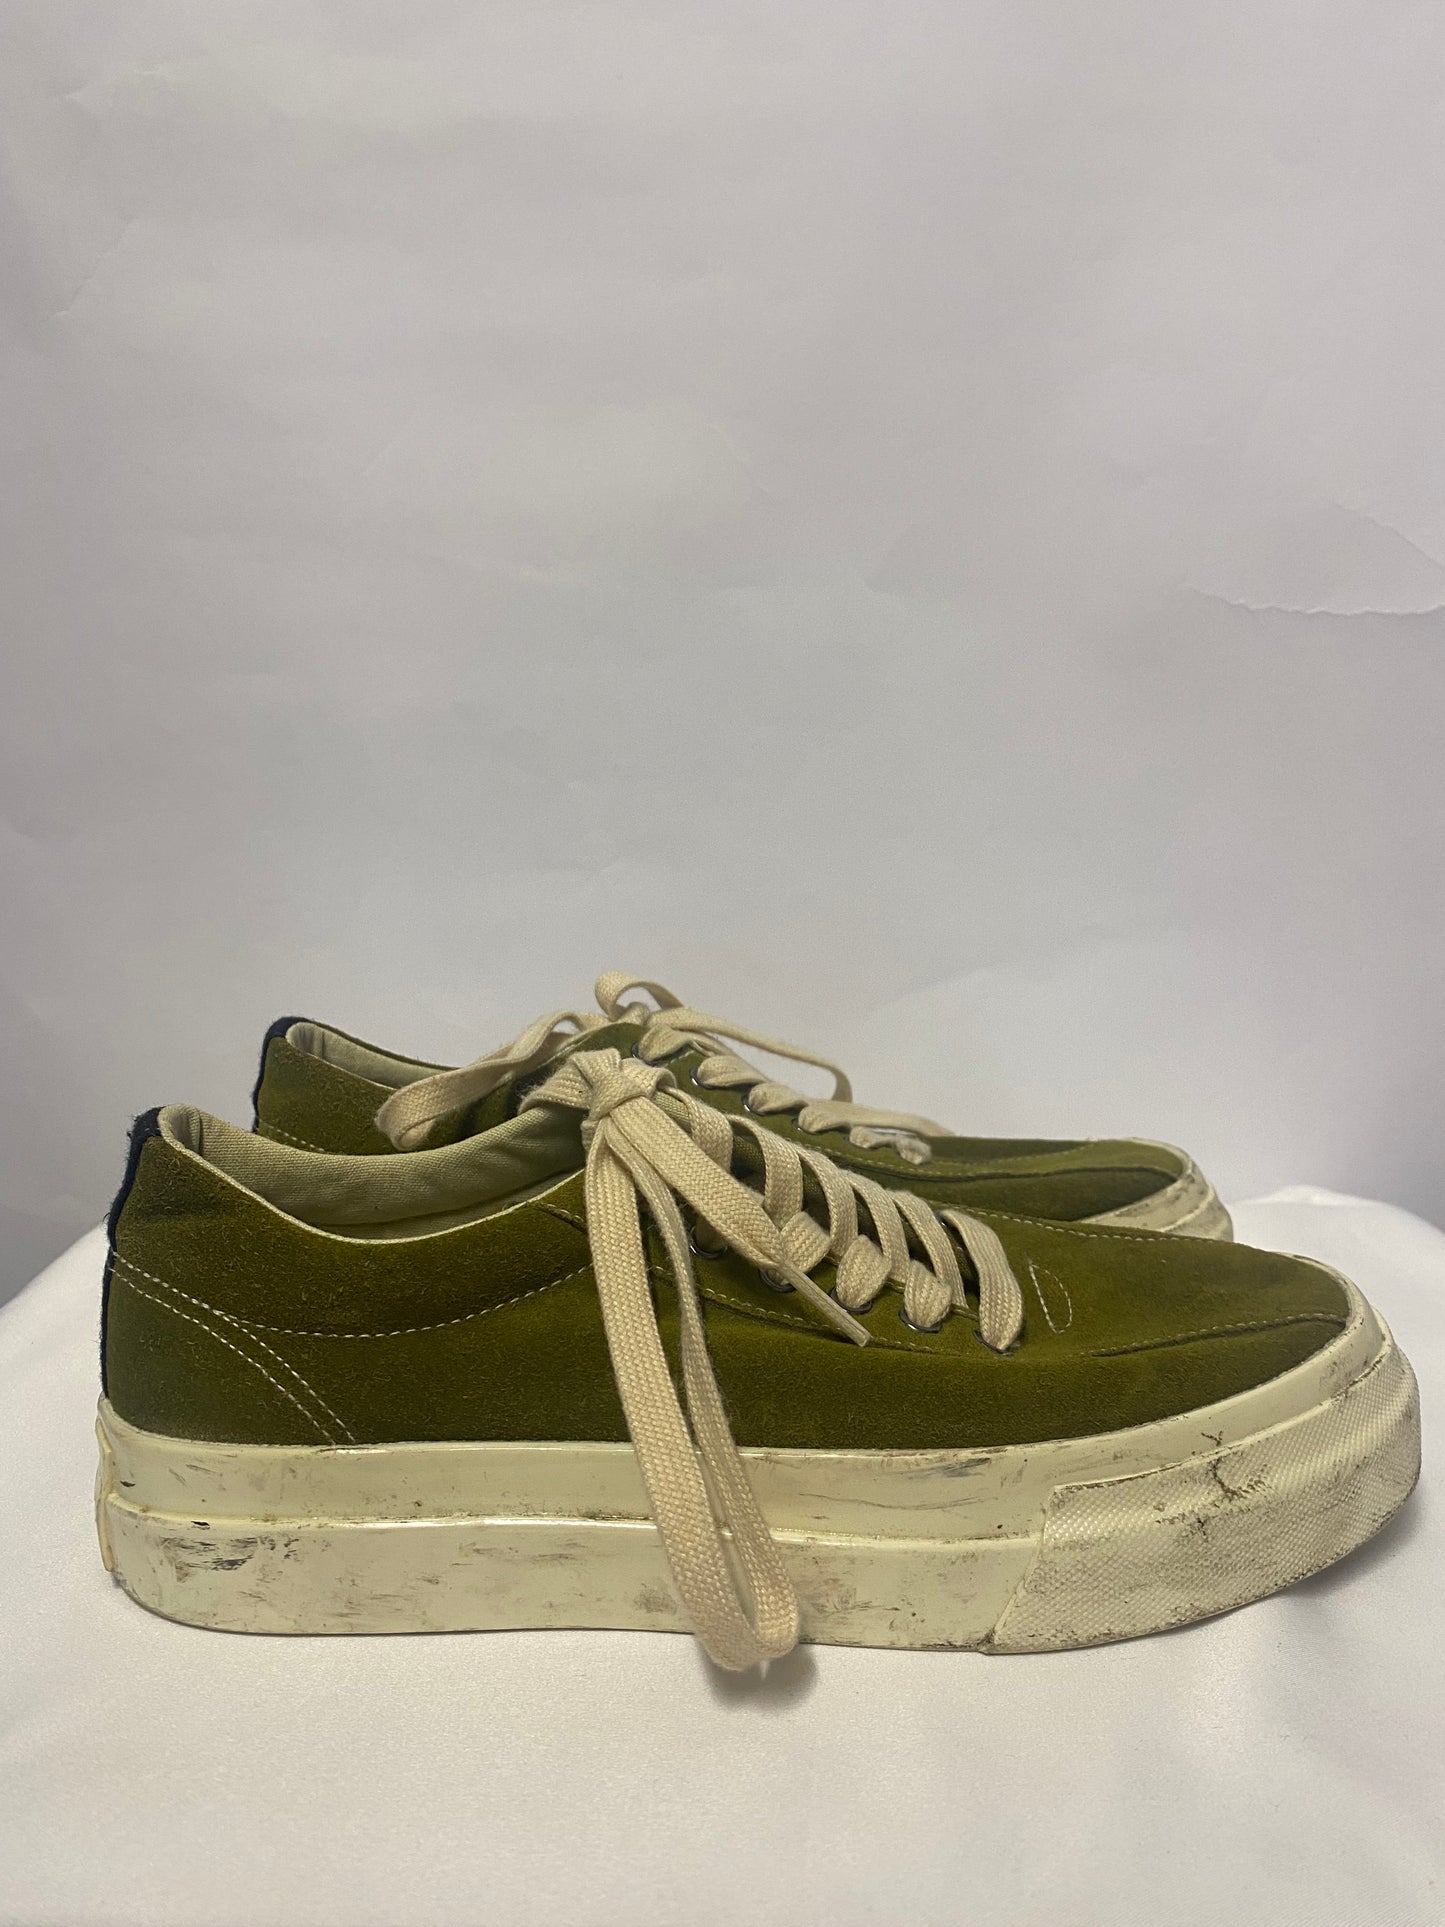 Stepney Workers Club Olive Green Suede Thick Sole Trainer 39/6